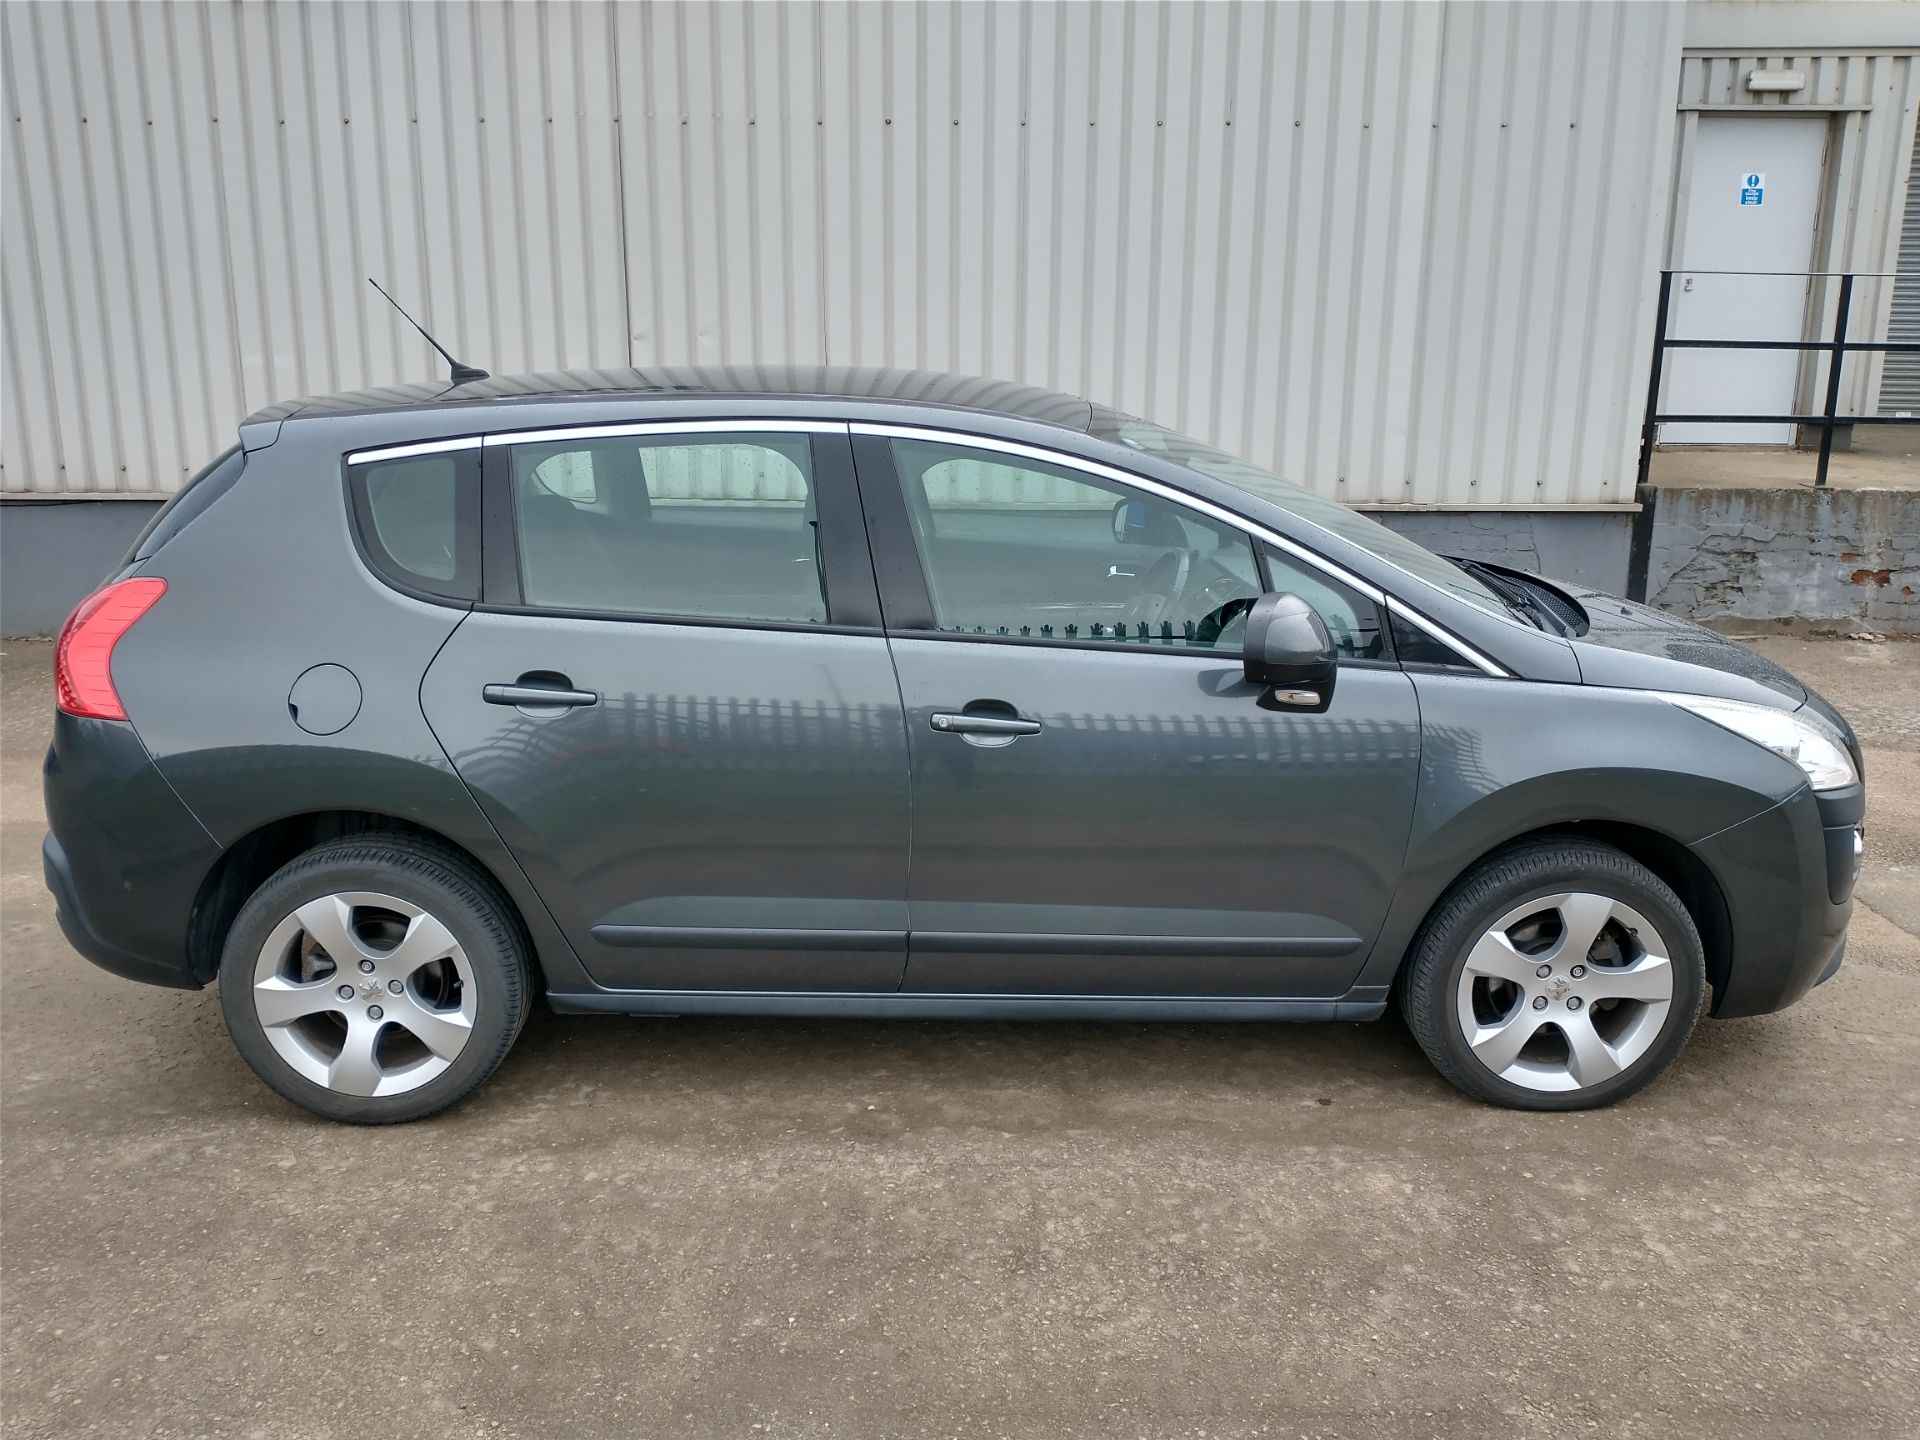 2012 Peugeot 3008 Active HDI 1.6 5DR SUV - CL505 - NO VAT ON THE HAMM - Image 13 of 19